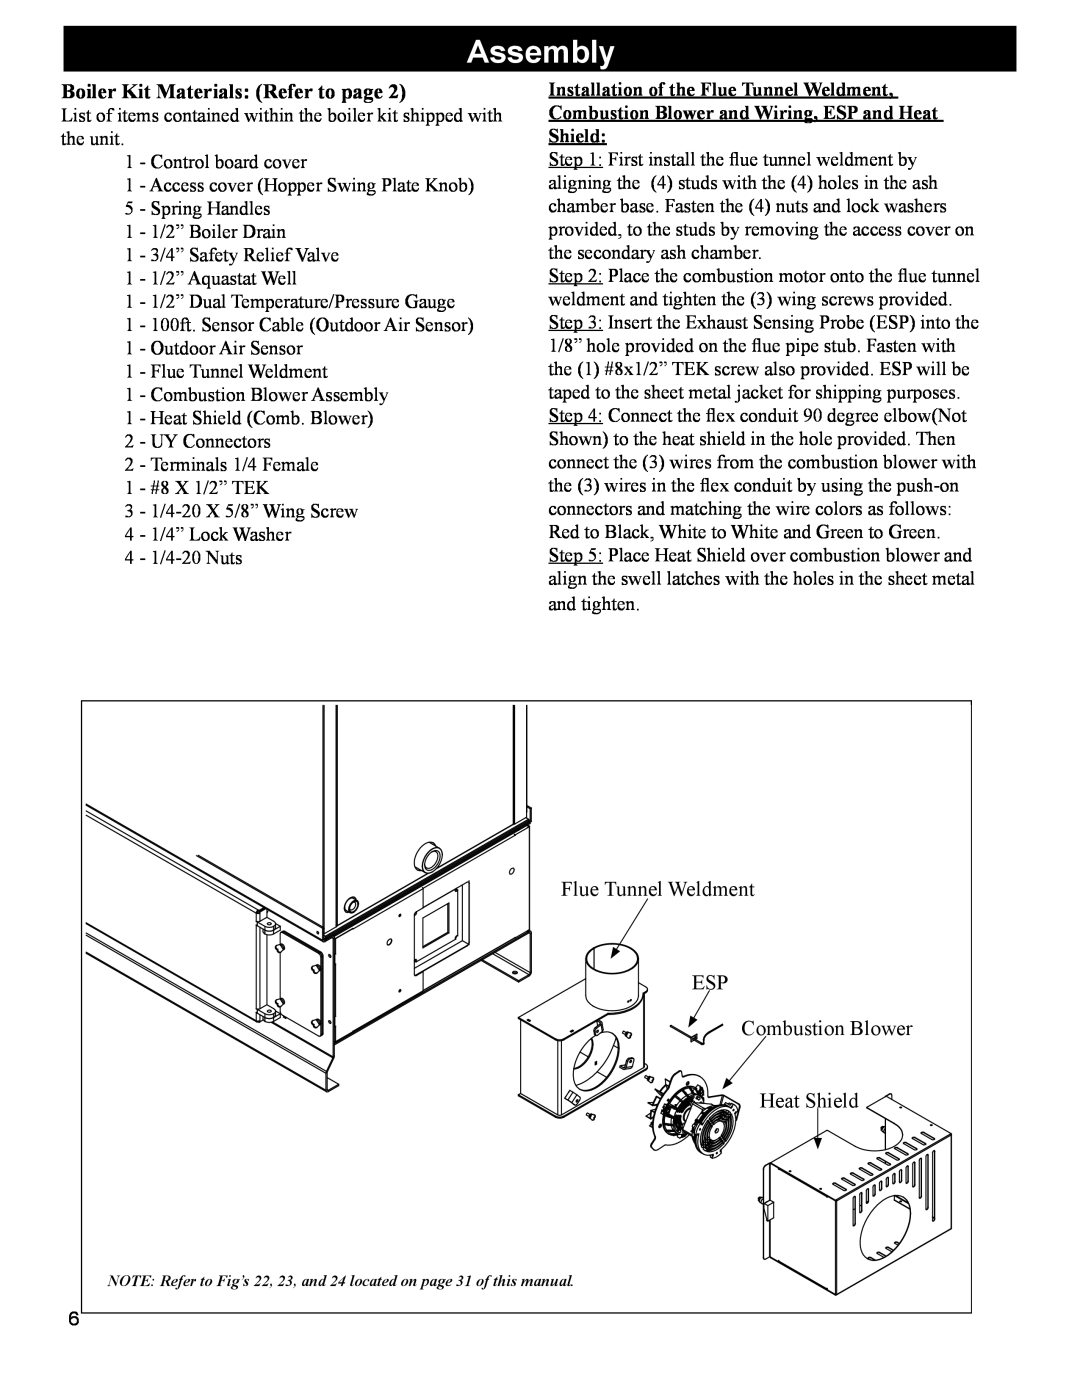 Hearth and Home Technologies BH 105 manual Assembly, Boiler Kit Materials Refer to page 